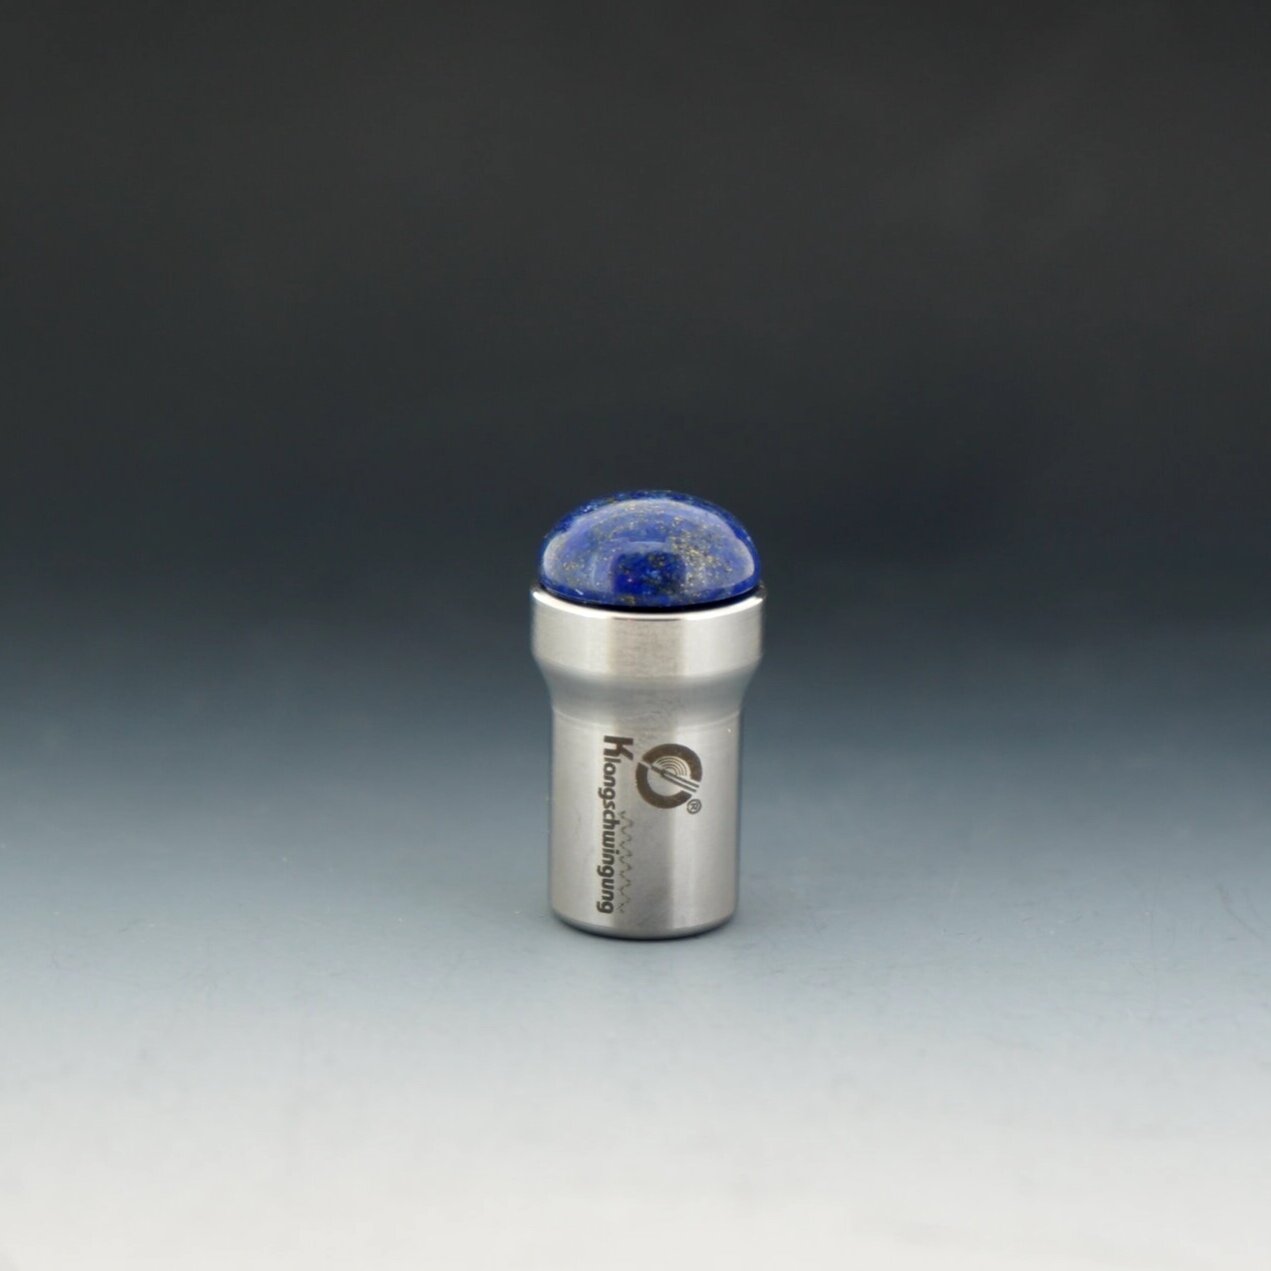 15mm Silver with Lapis Lazuli Gem Foot for Otto Tune